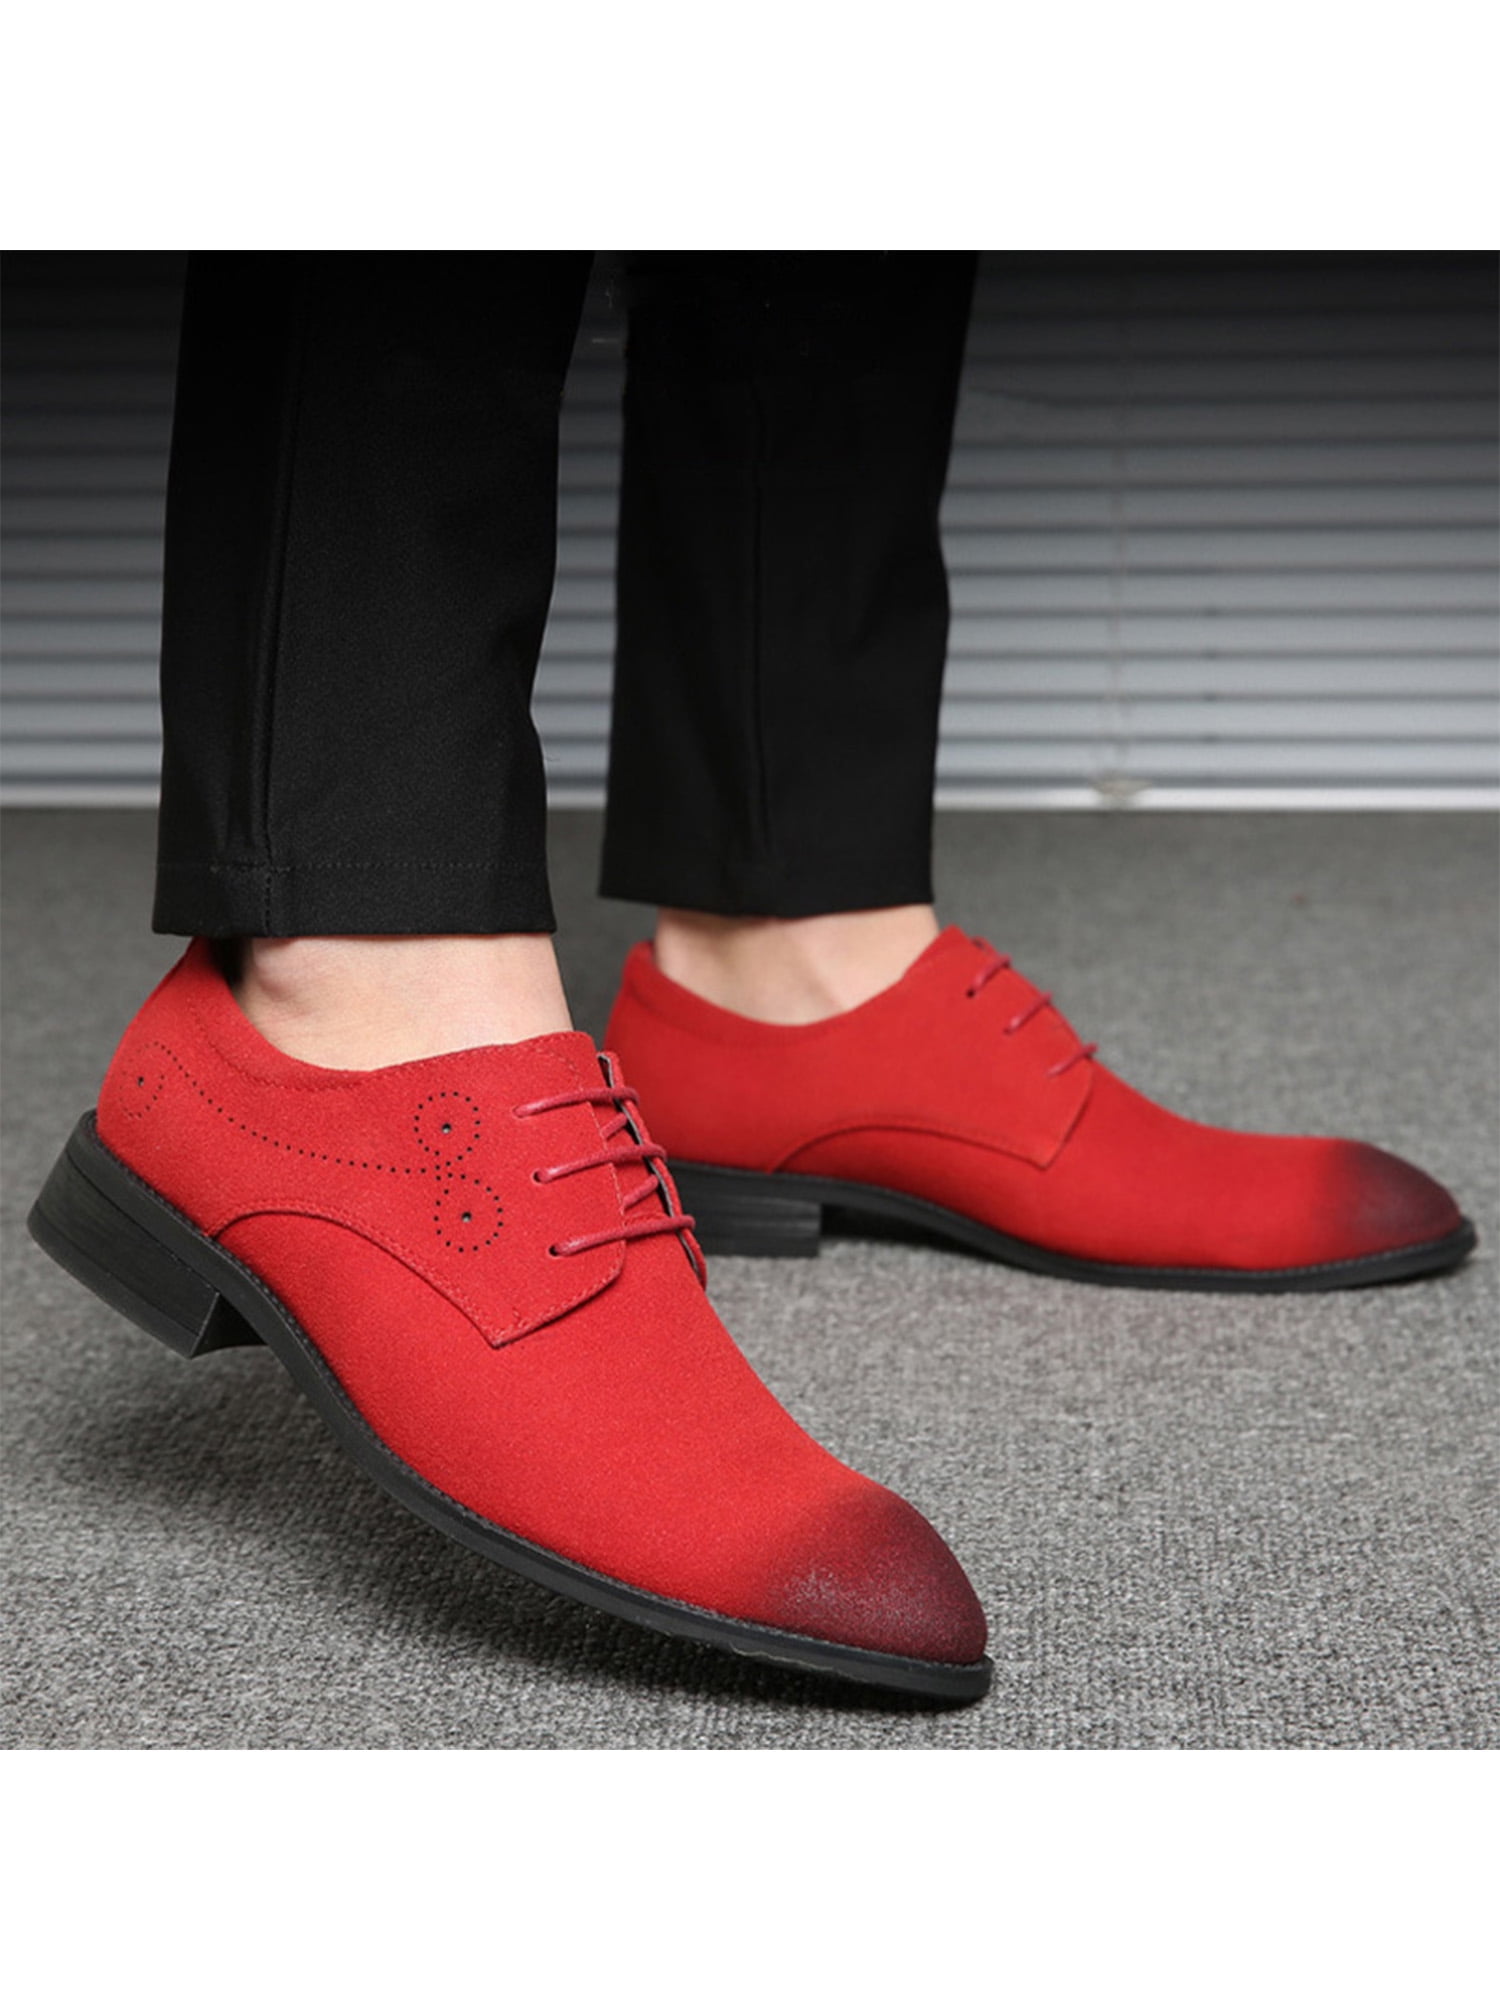 WeeDee Large Size Men Comfy Casual Microfiber Leather Oxfords Shoes 